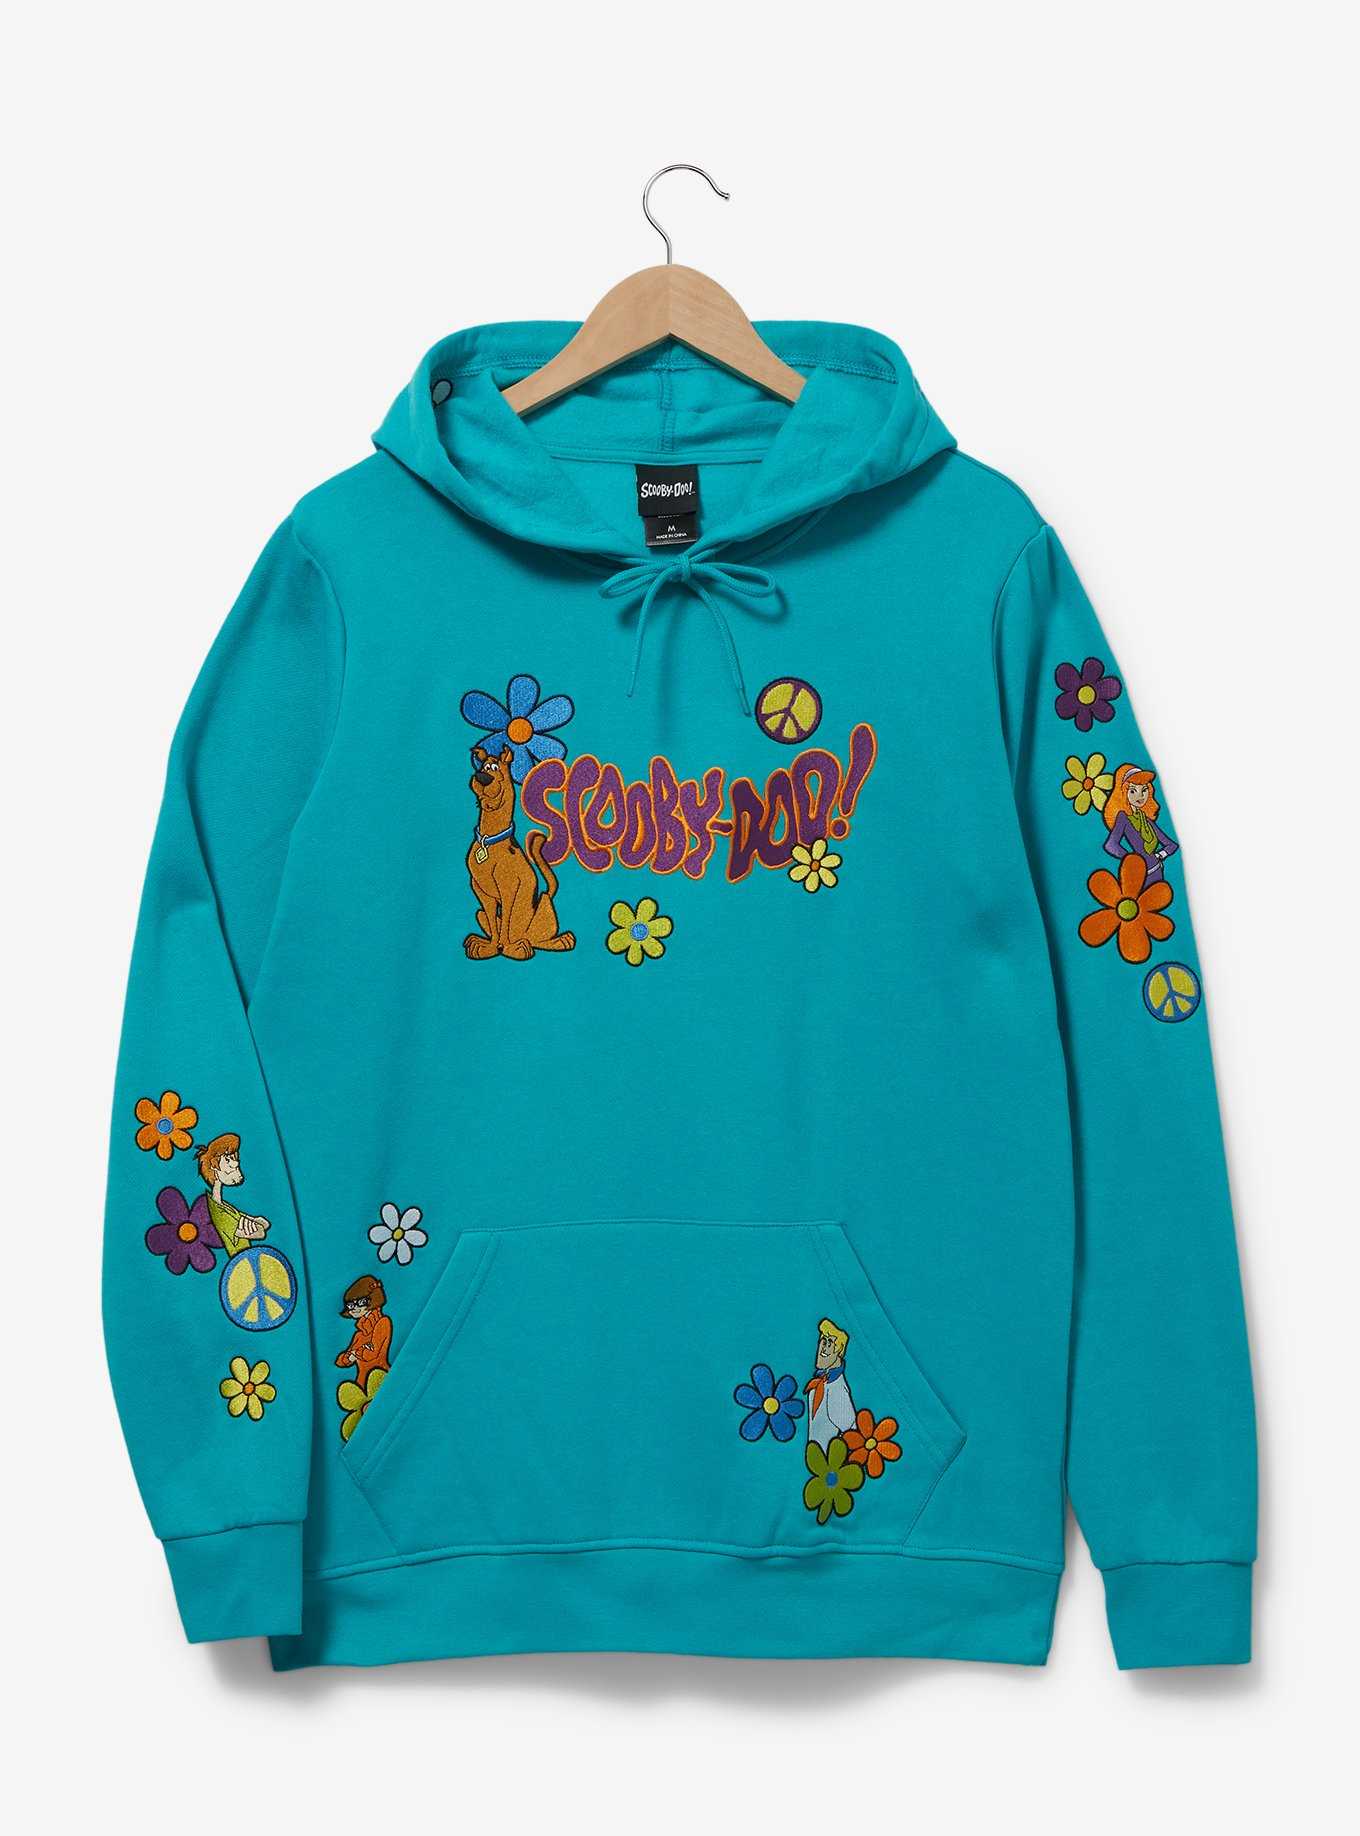 OFFICIAL Scooby-Doo Hoodies & | Gifts BoxLunch Sweaters